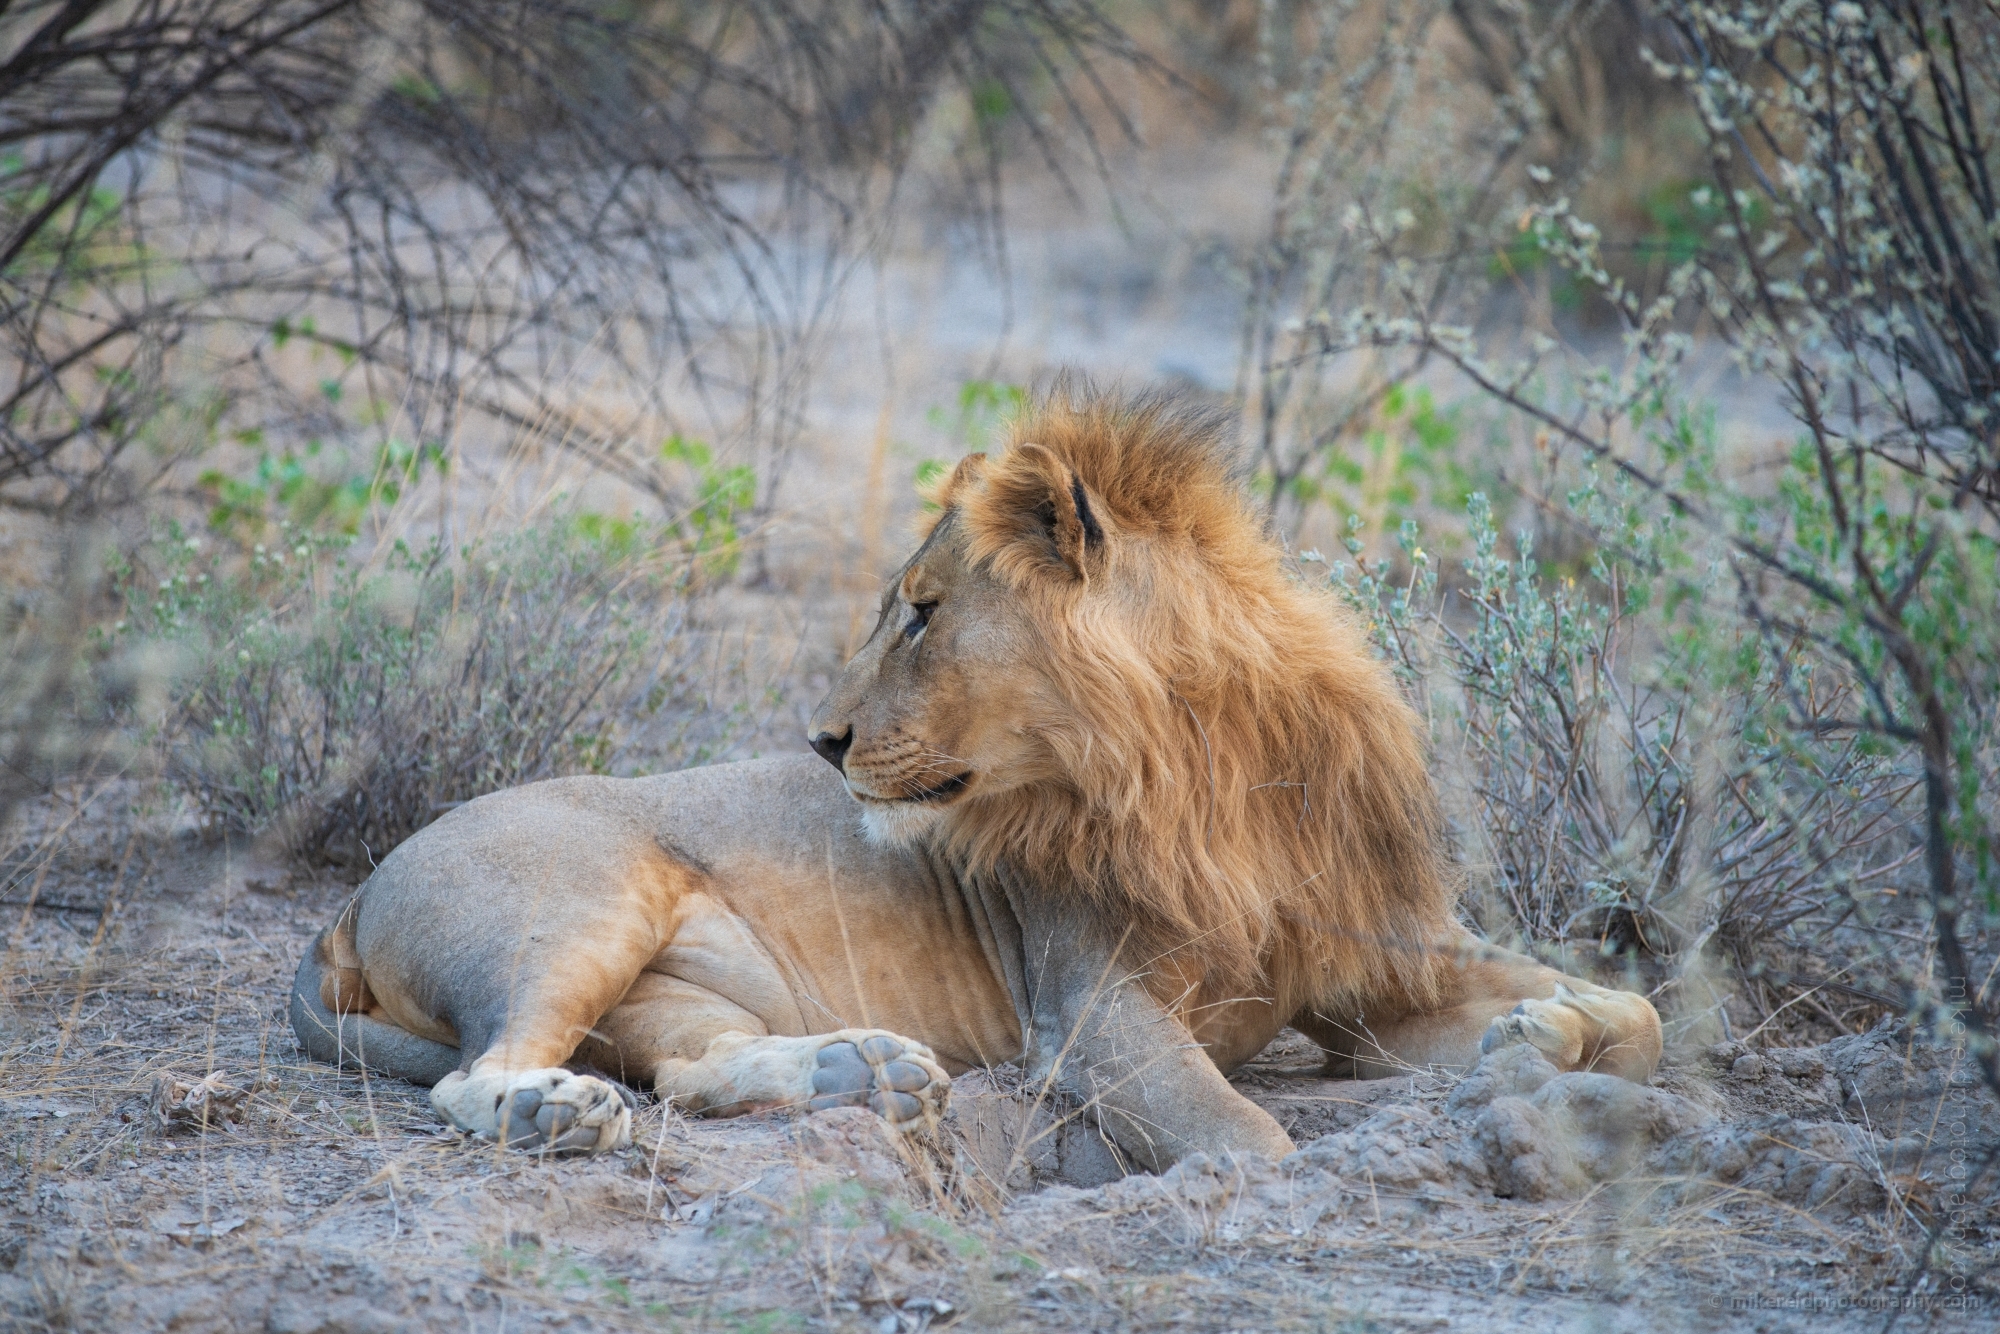 Namibia Wildlife Photography Lion in Repose